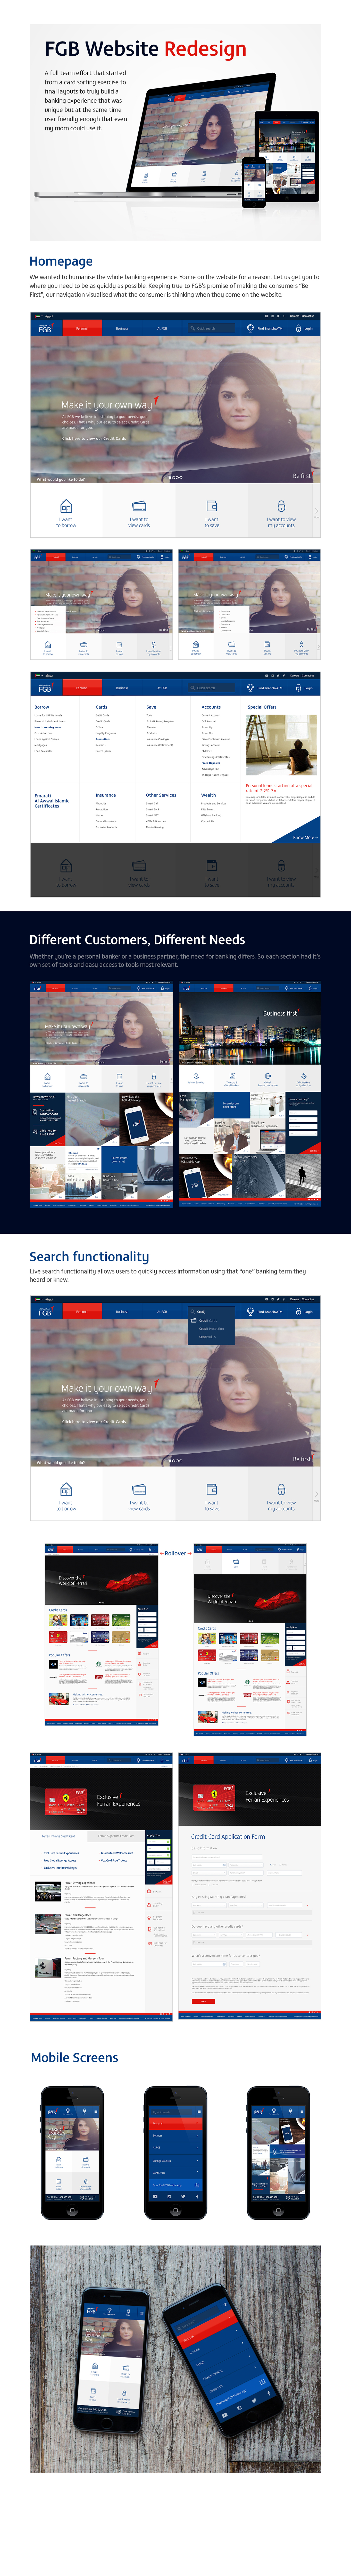 redesign Website UI/UX blue red banking